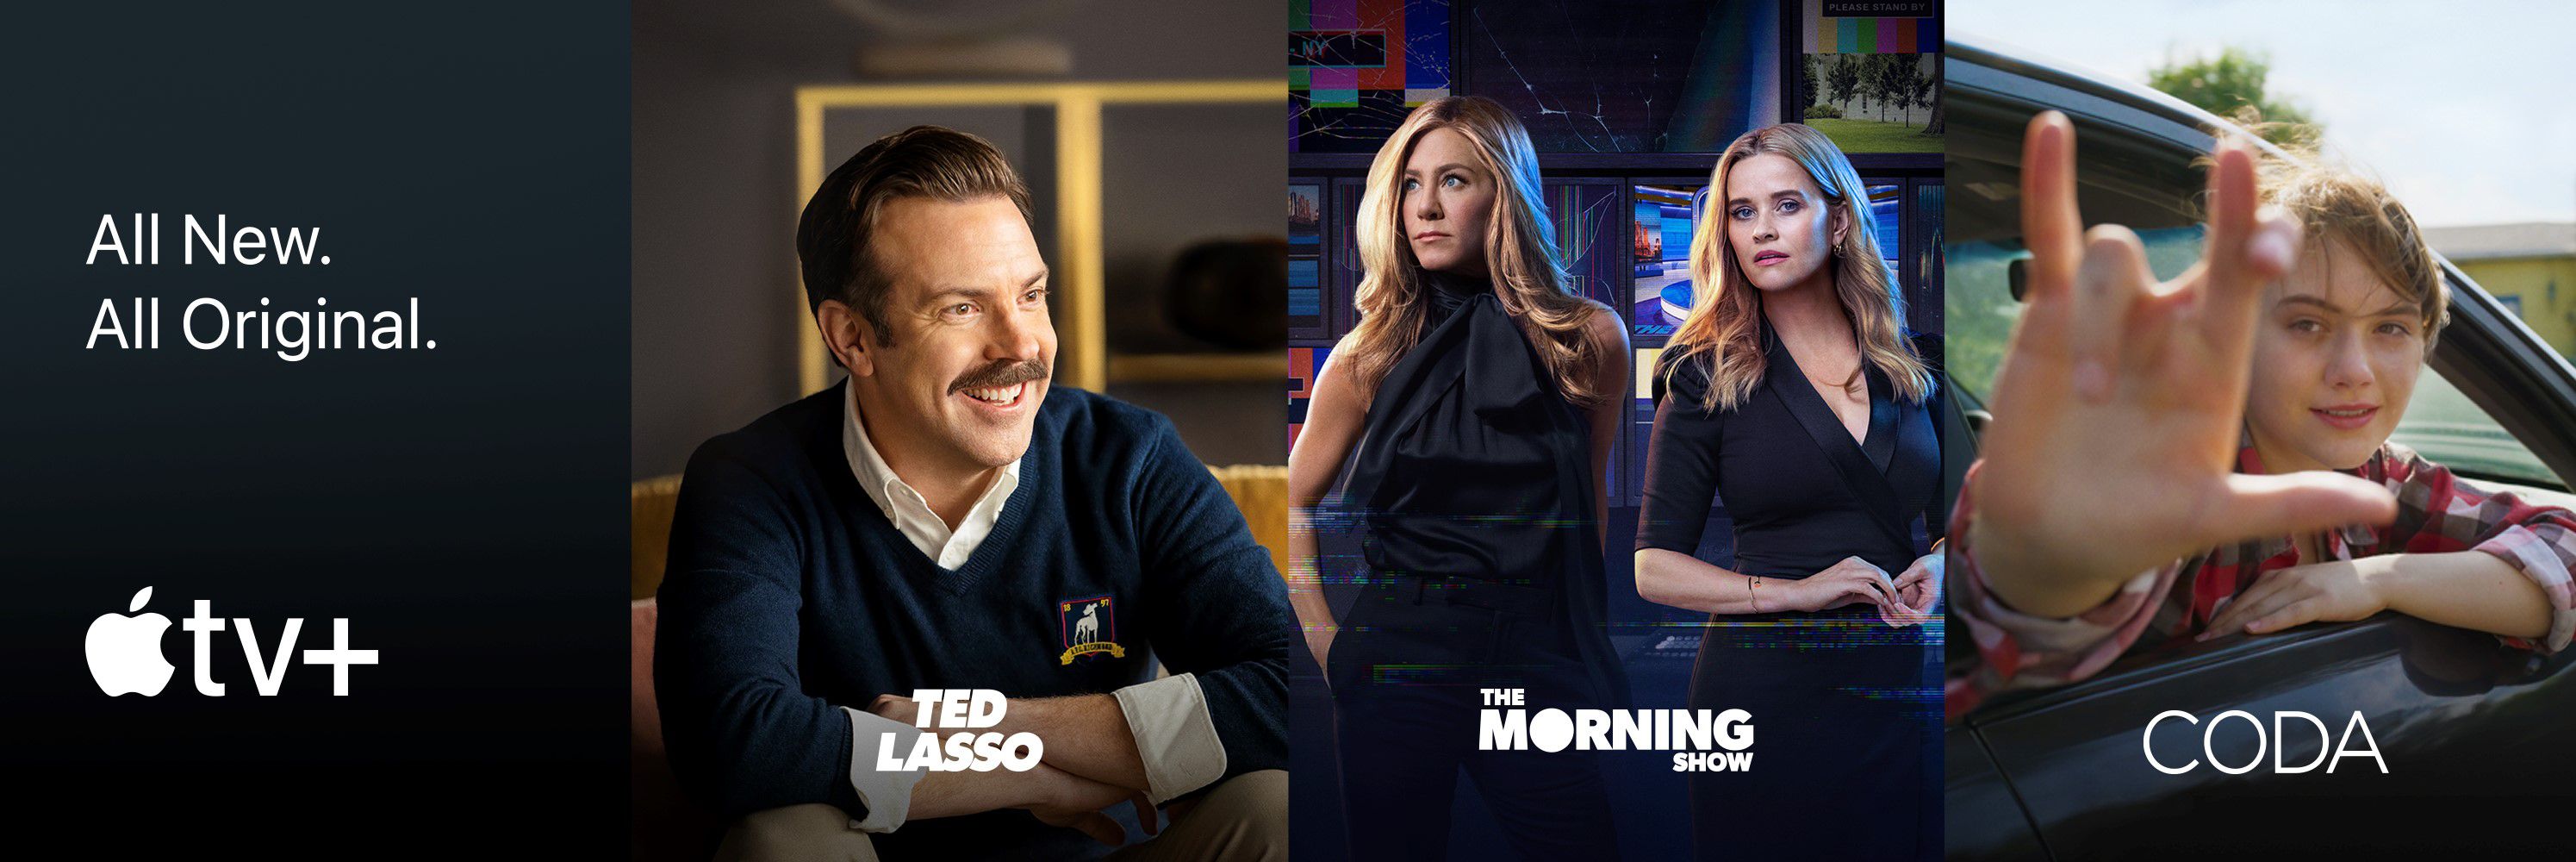 All new. All Original. Apple TV+ series promos for Ted Lasso, The Morning Show, and CODA.